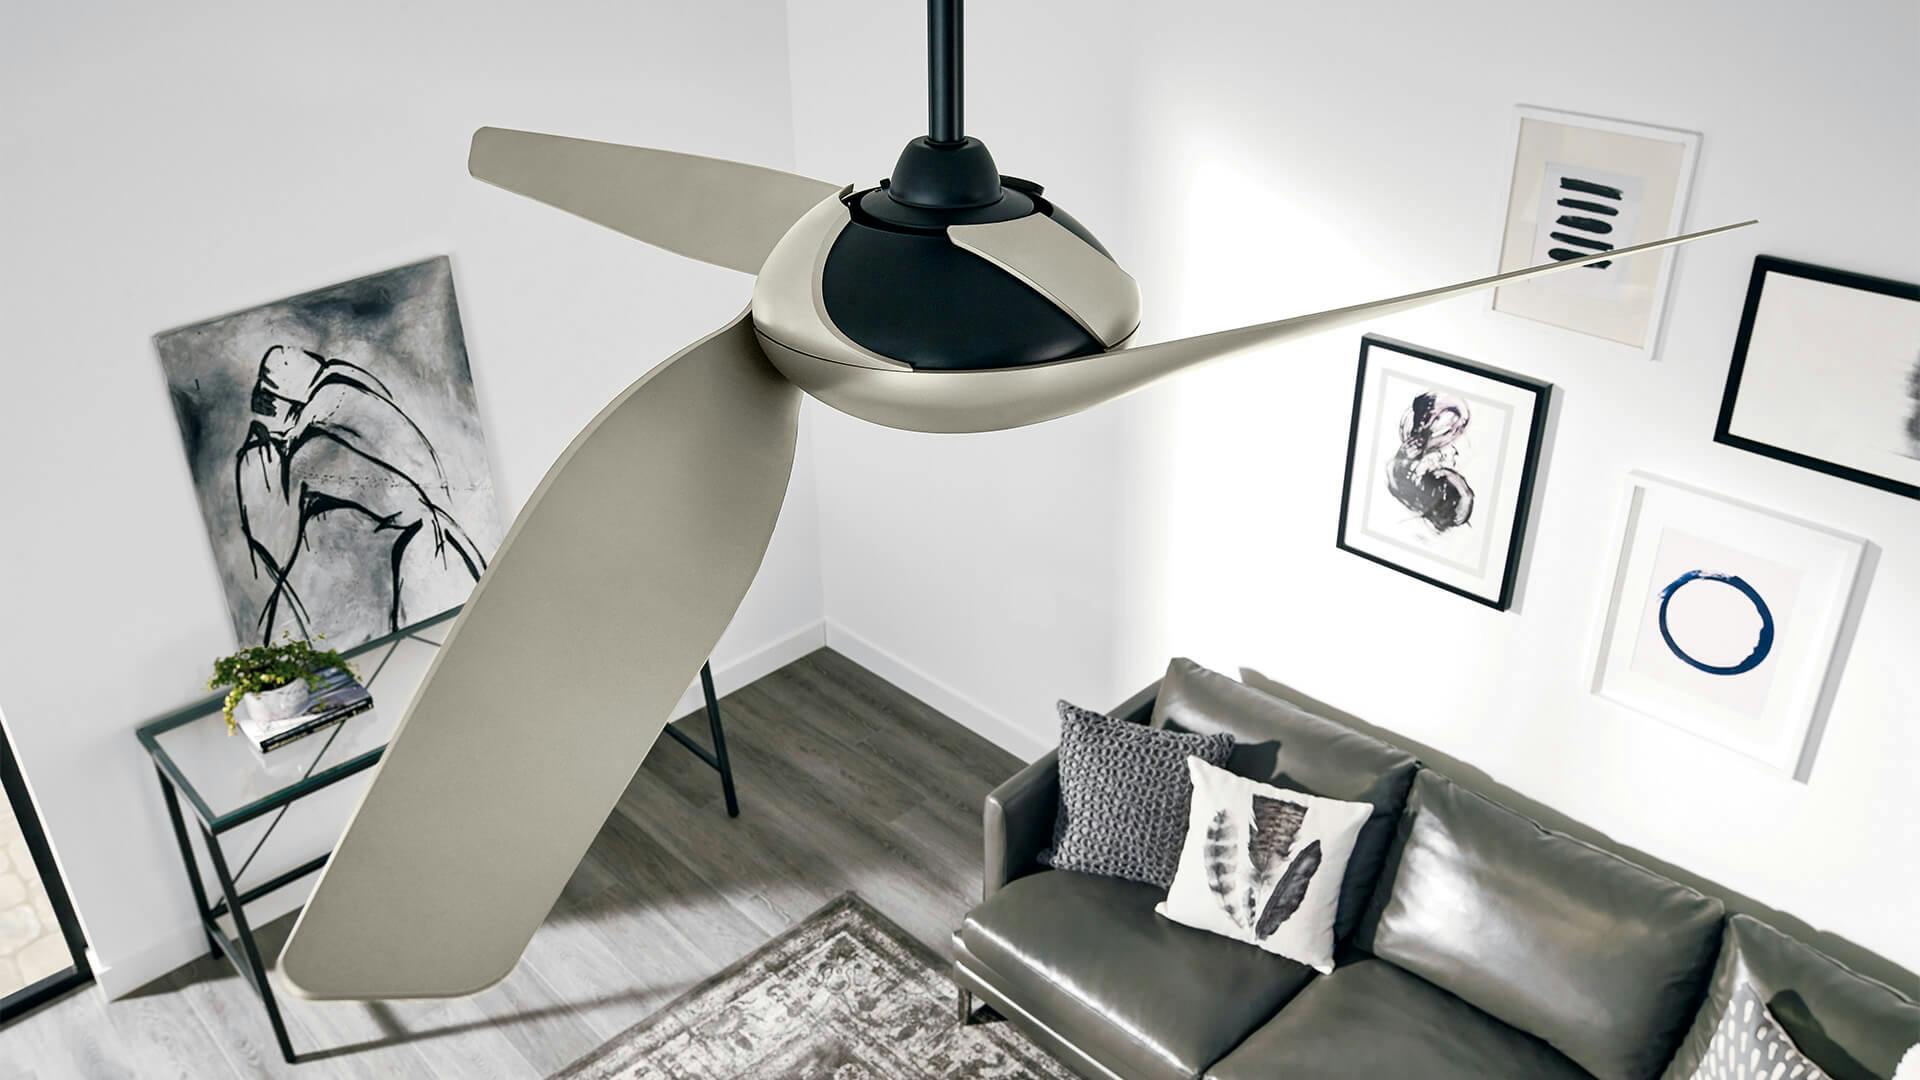 Close up of a Zenith fan in a modern living room